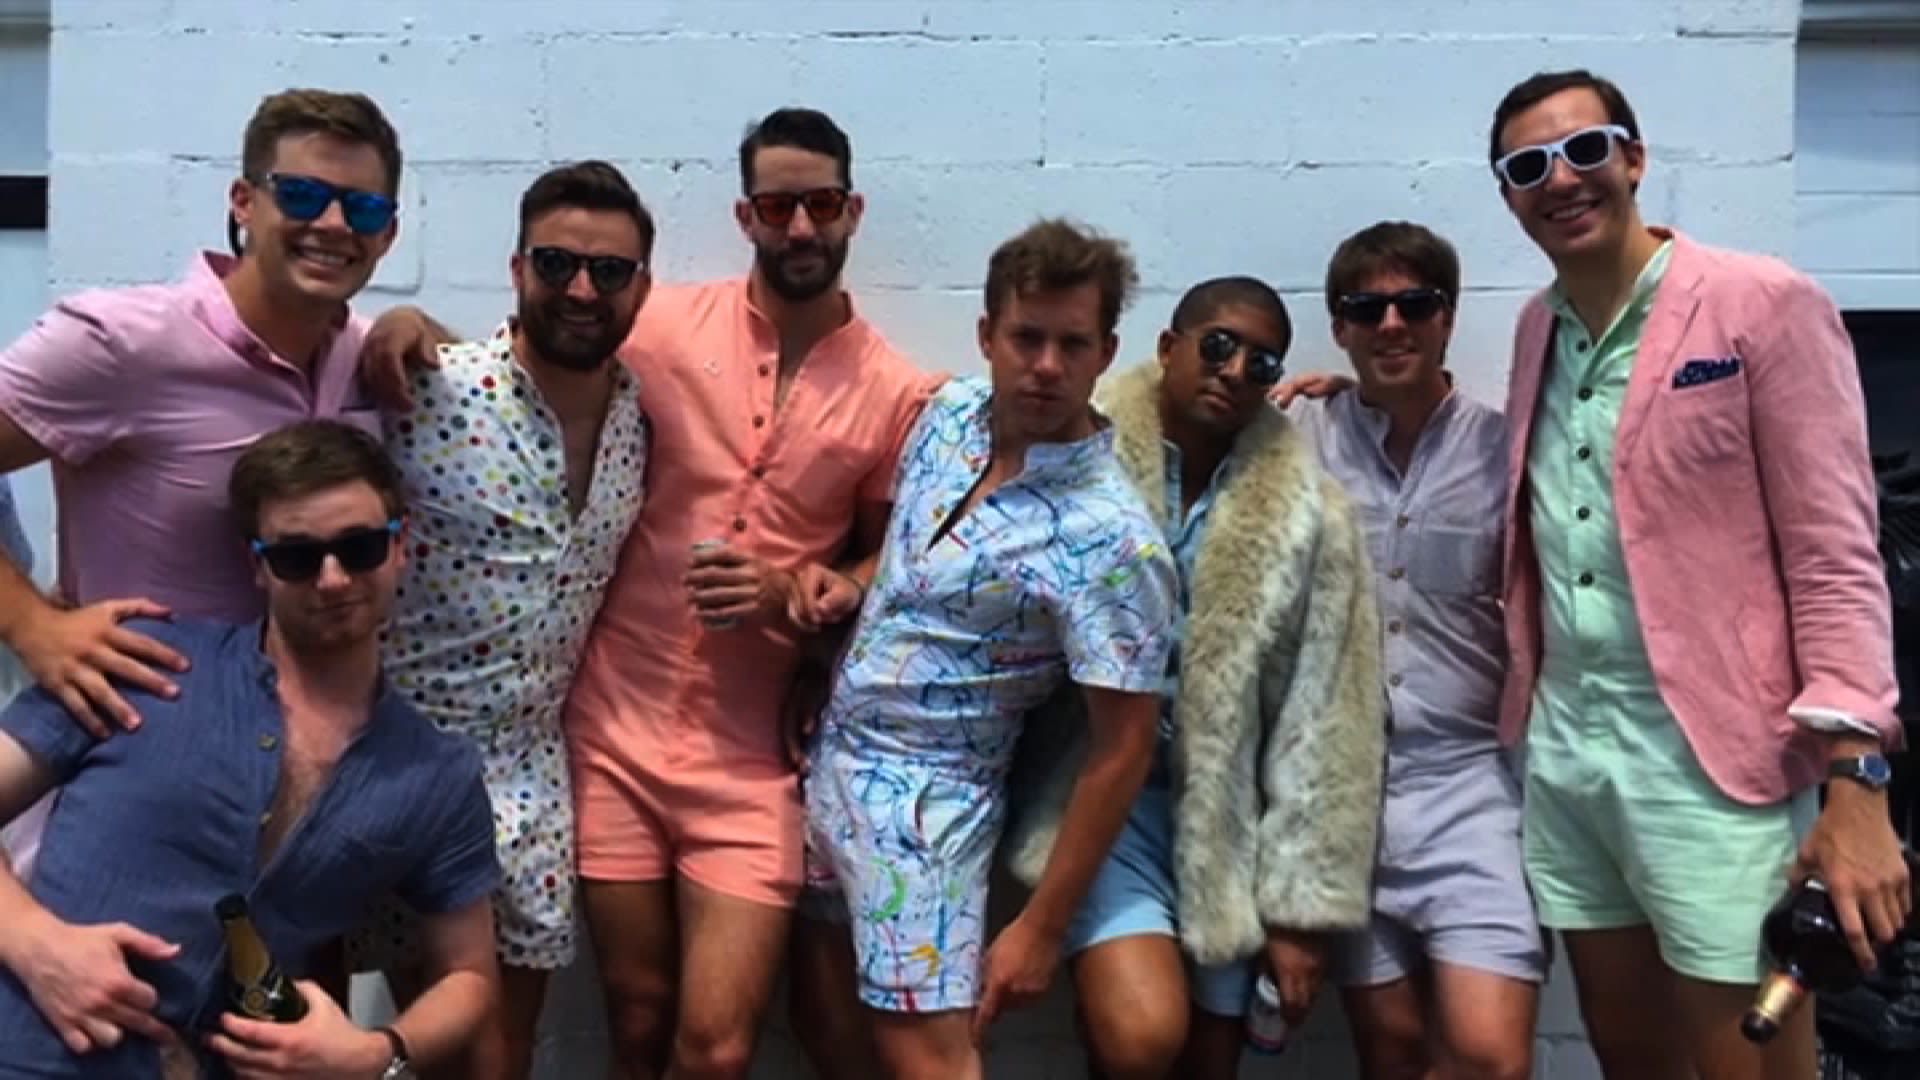 Why is talking about male rompers |